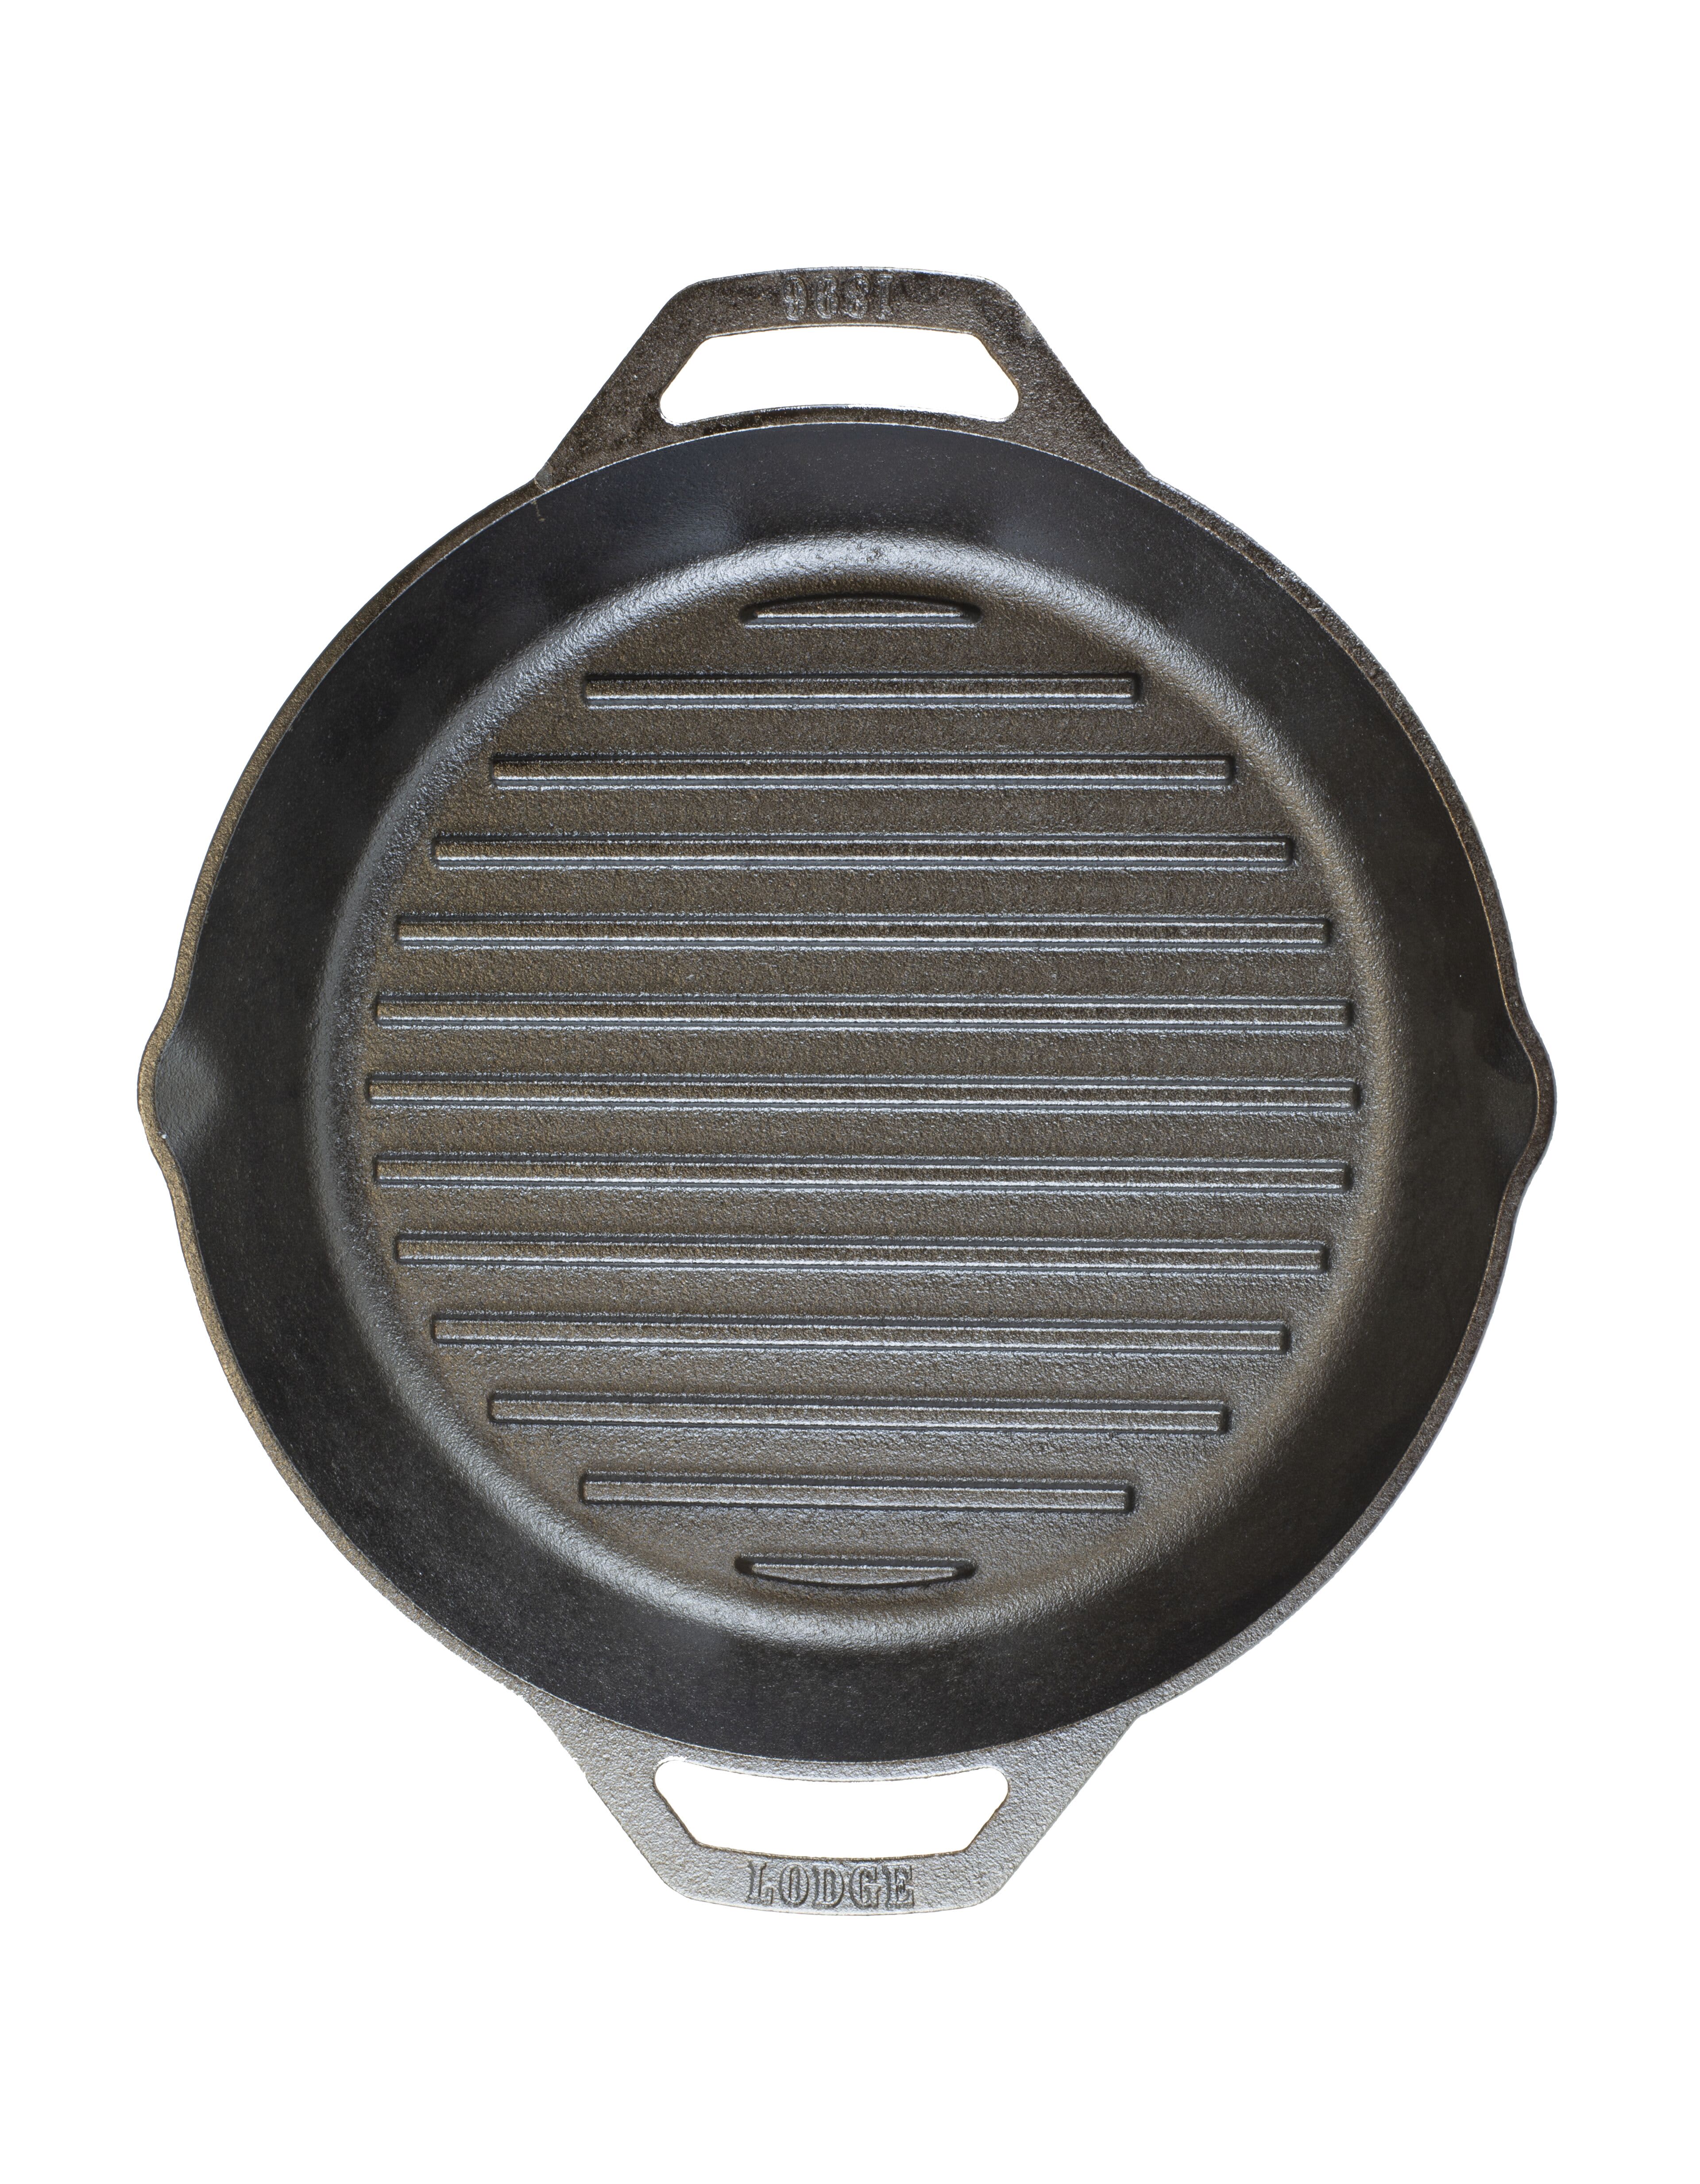 Lodge® 12 Inch Dual Handle Cast Iron Grill Pan